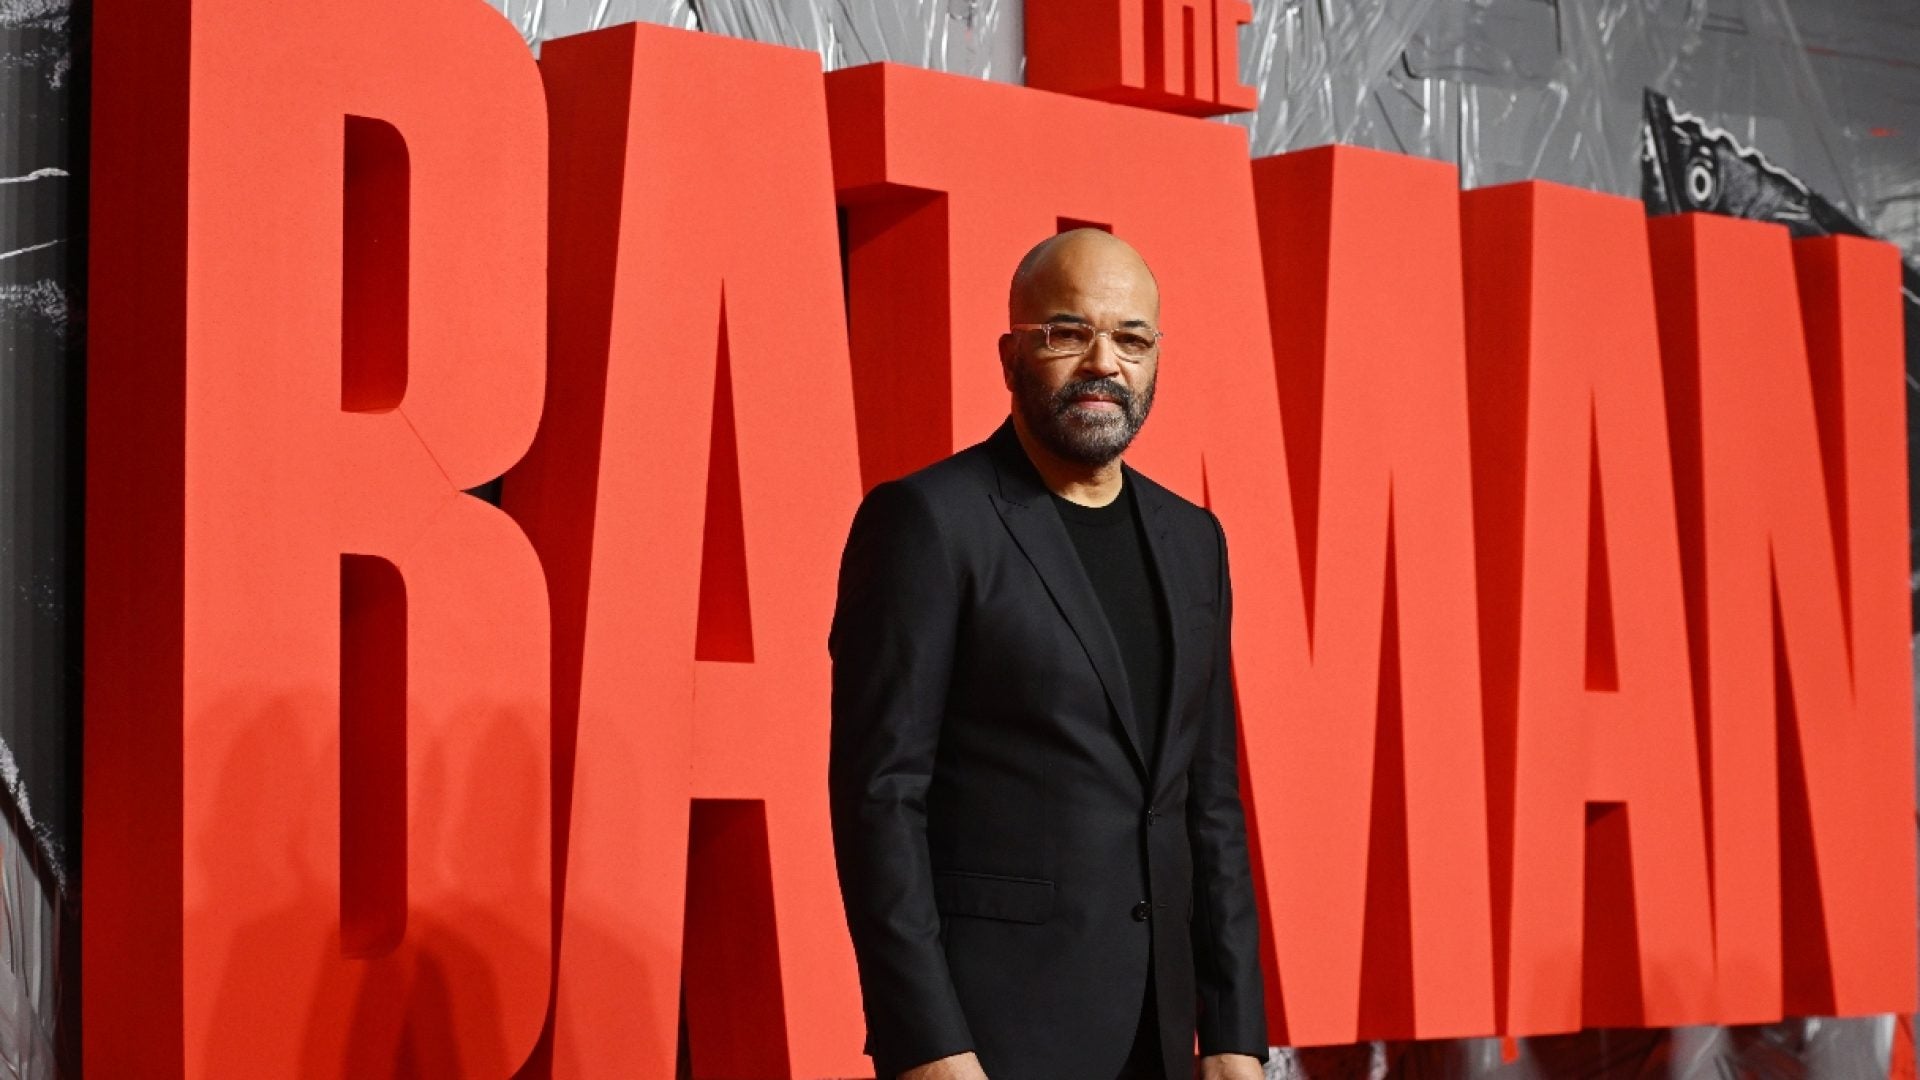 Jeffrey Wright Invites Us To Decolonize Our Perspective As He Plays The First Black Gordon In 'The Batman'